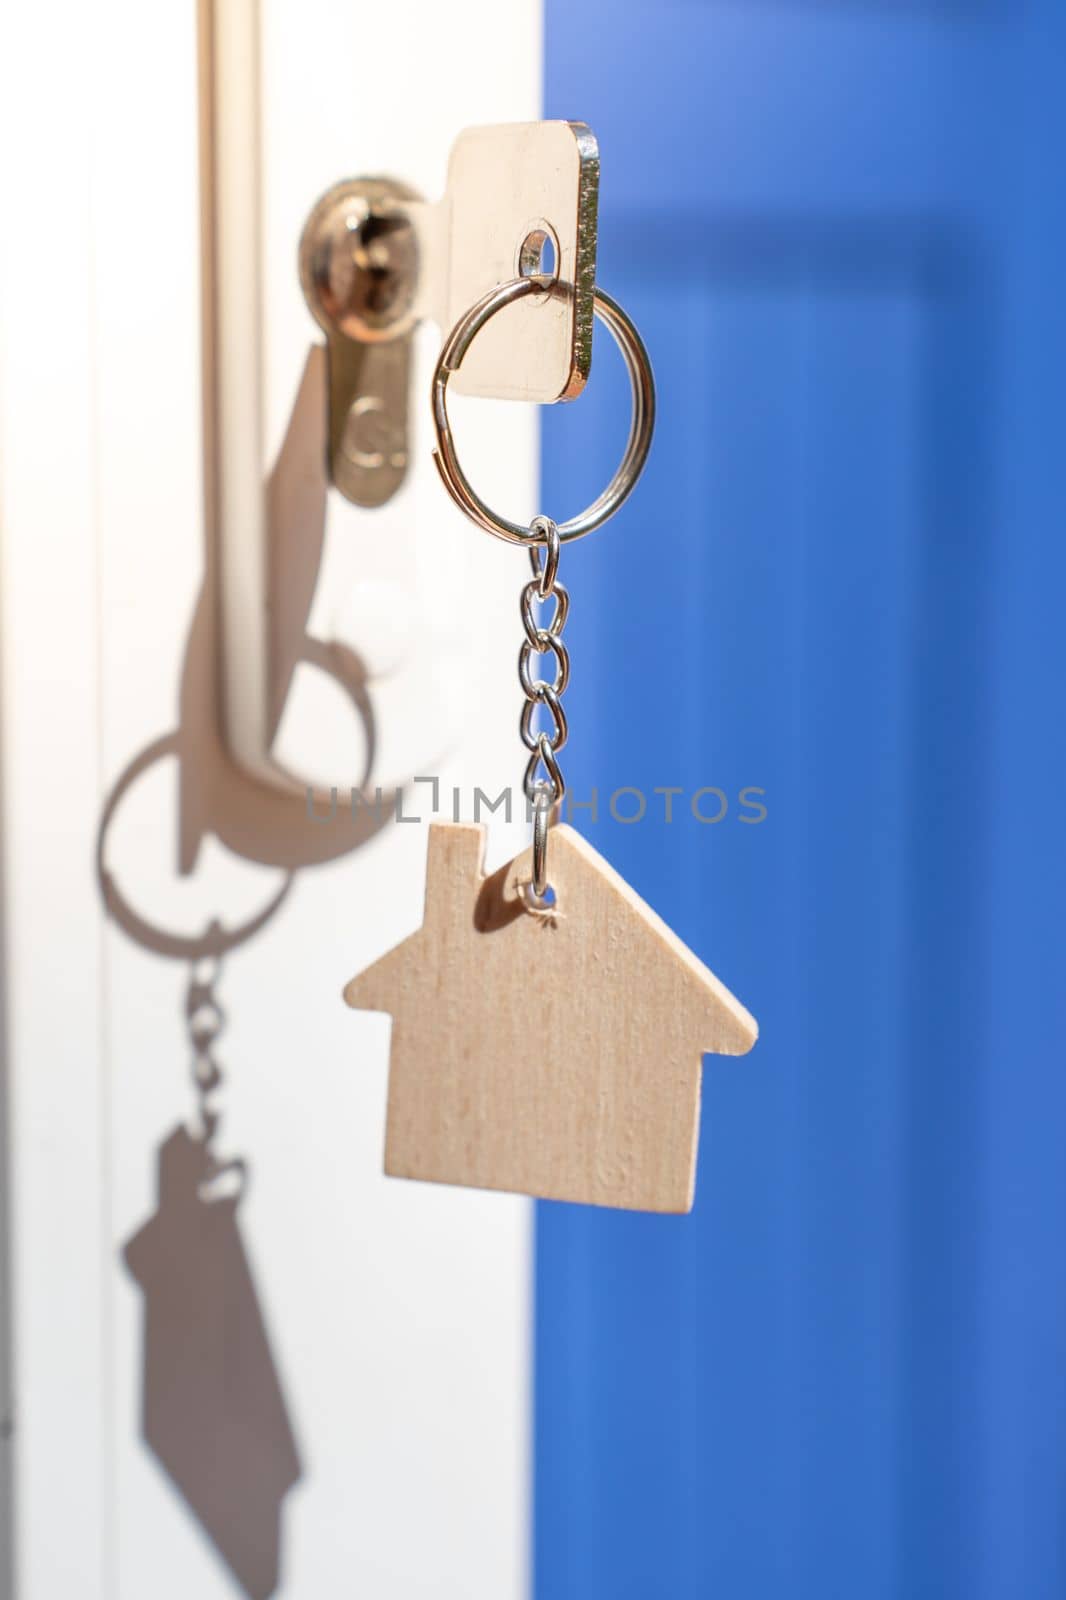 Opening door to a new home with key and home shaped keychain. Property and new home concept by PaulCarr